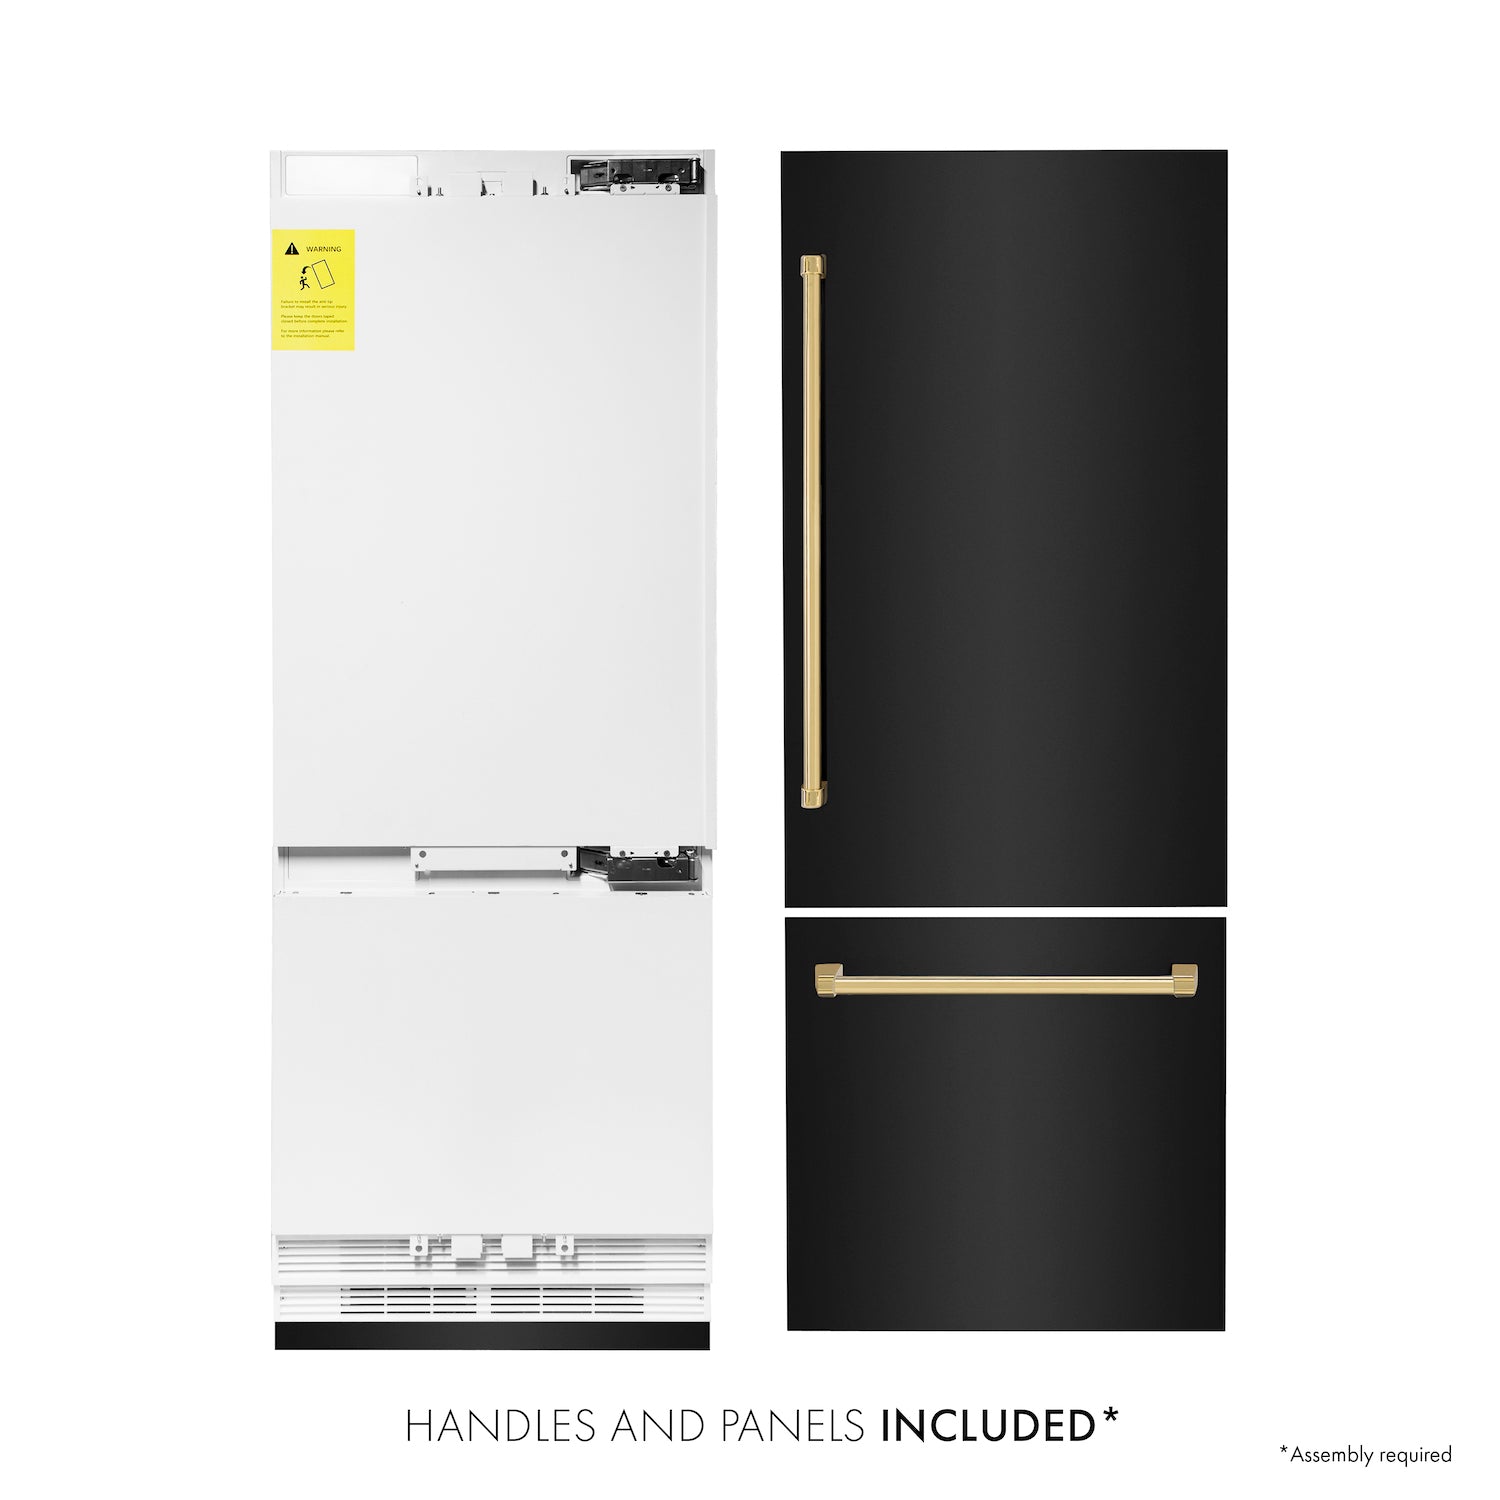 Brushed Stainless Steel Digital Refrigerator and Freezer